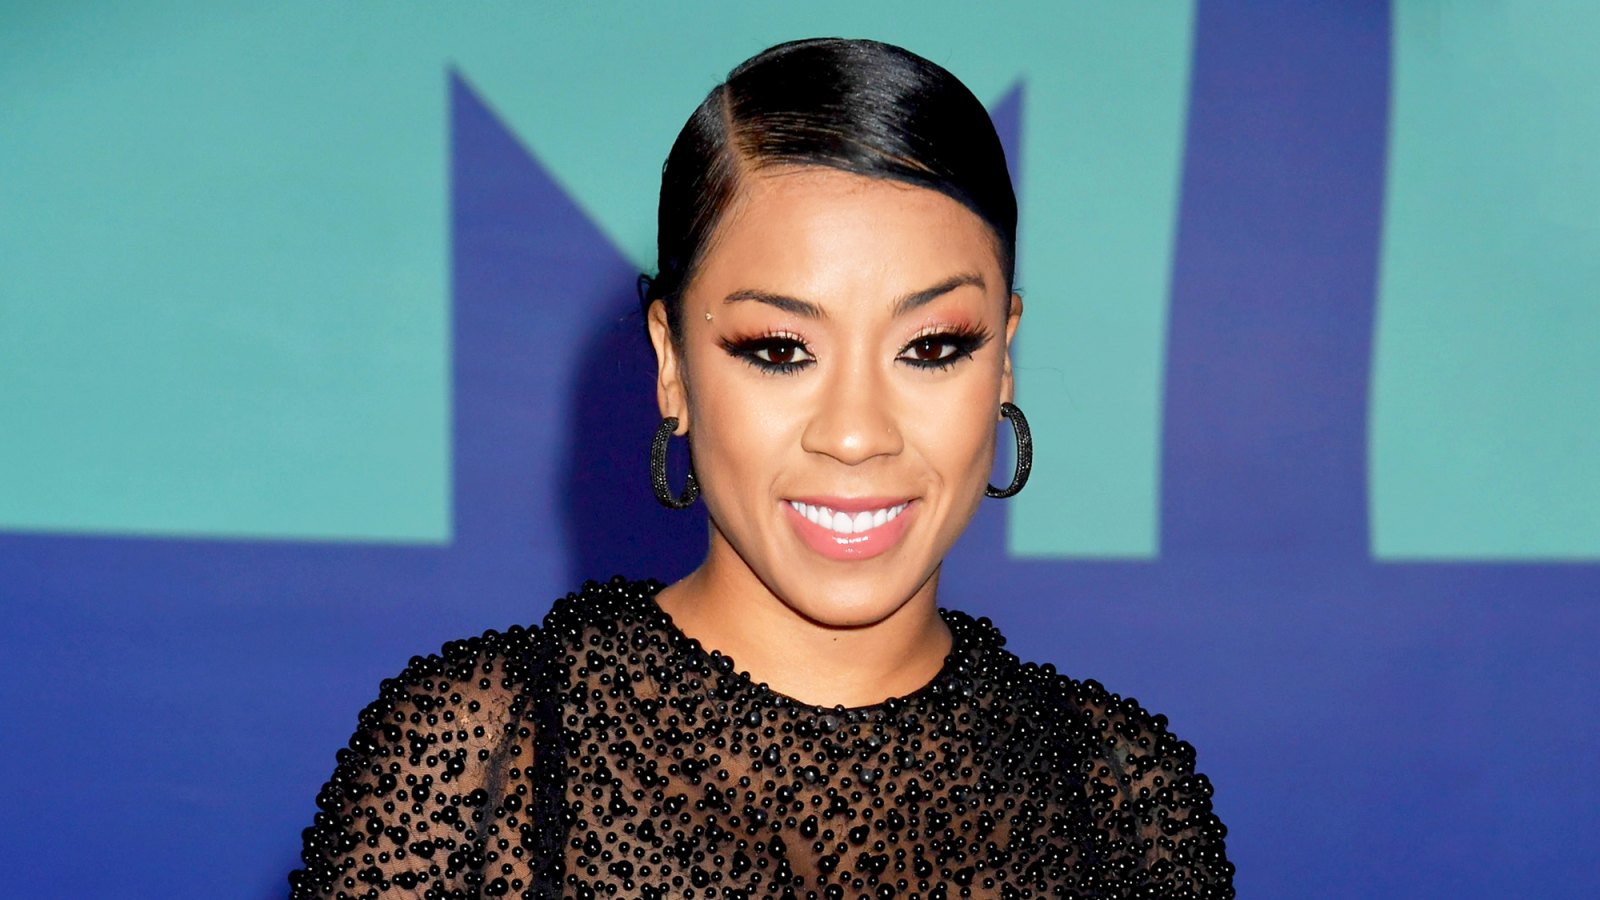 Keyshia Cole attends the 2017 MTV Video Music Awards at The Forum in Inglewood, California.